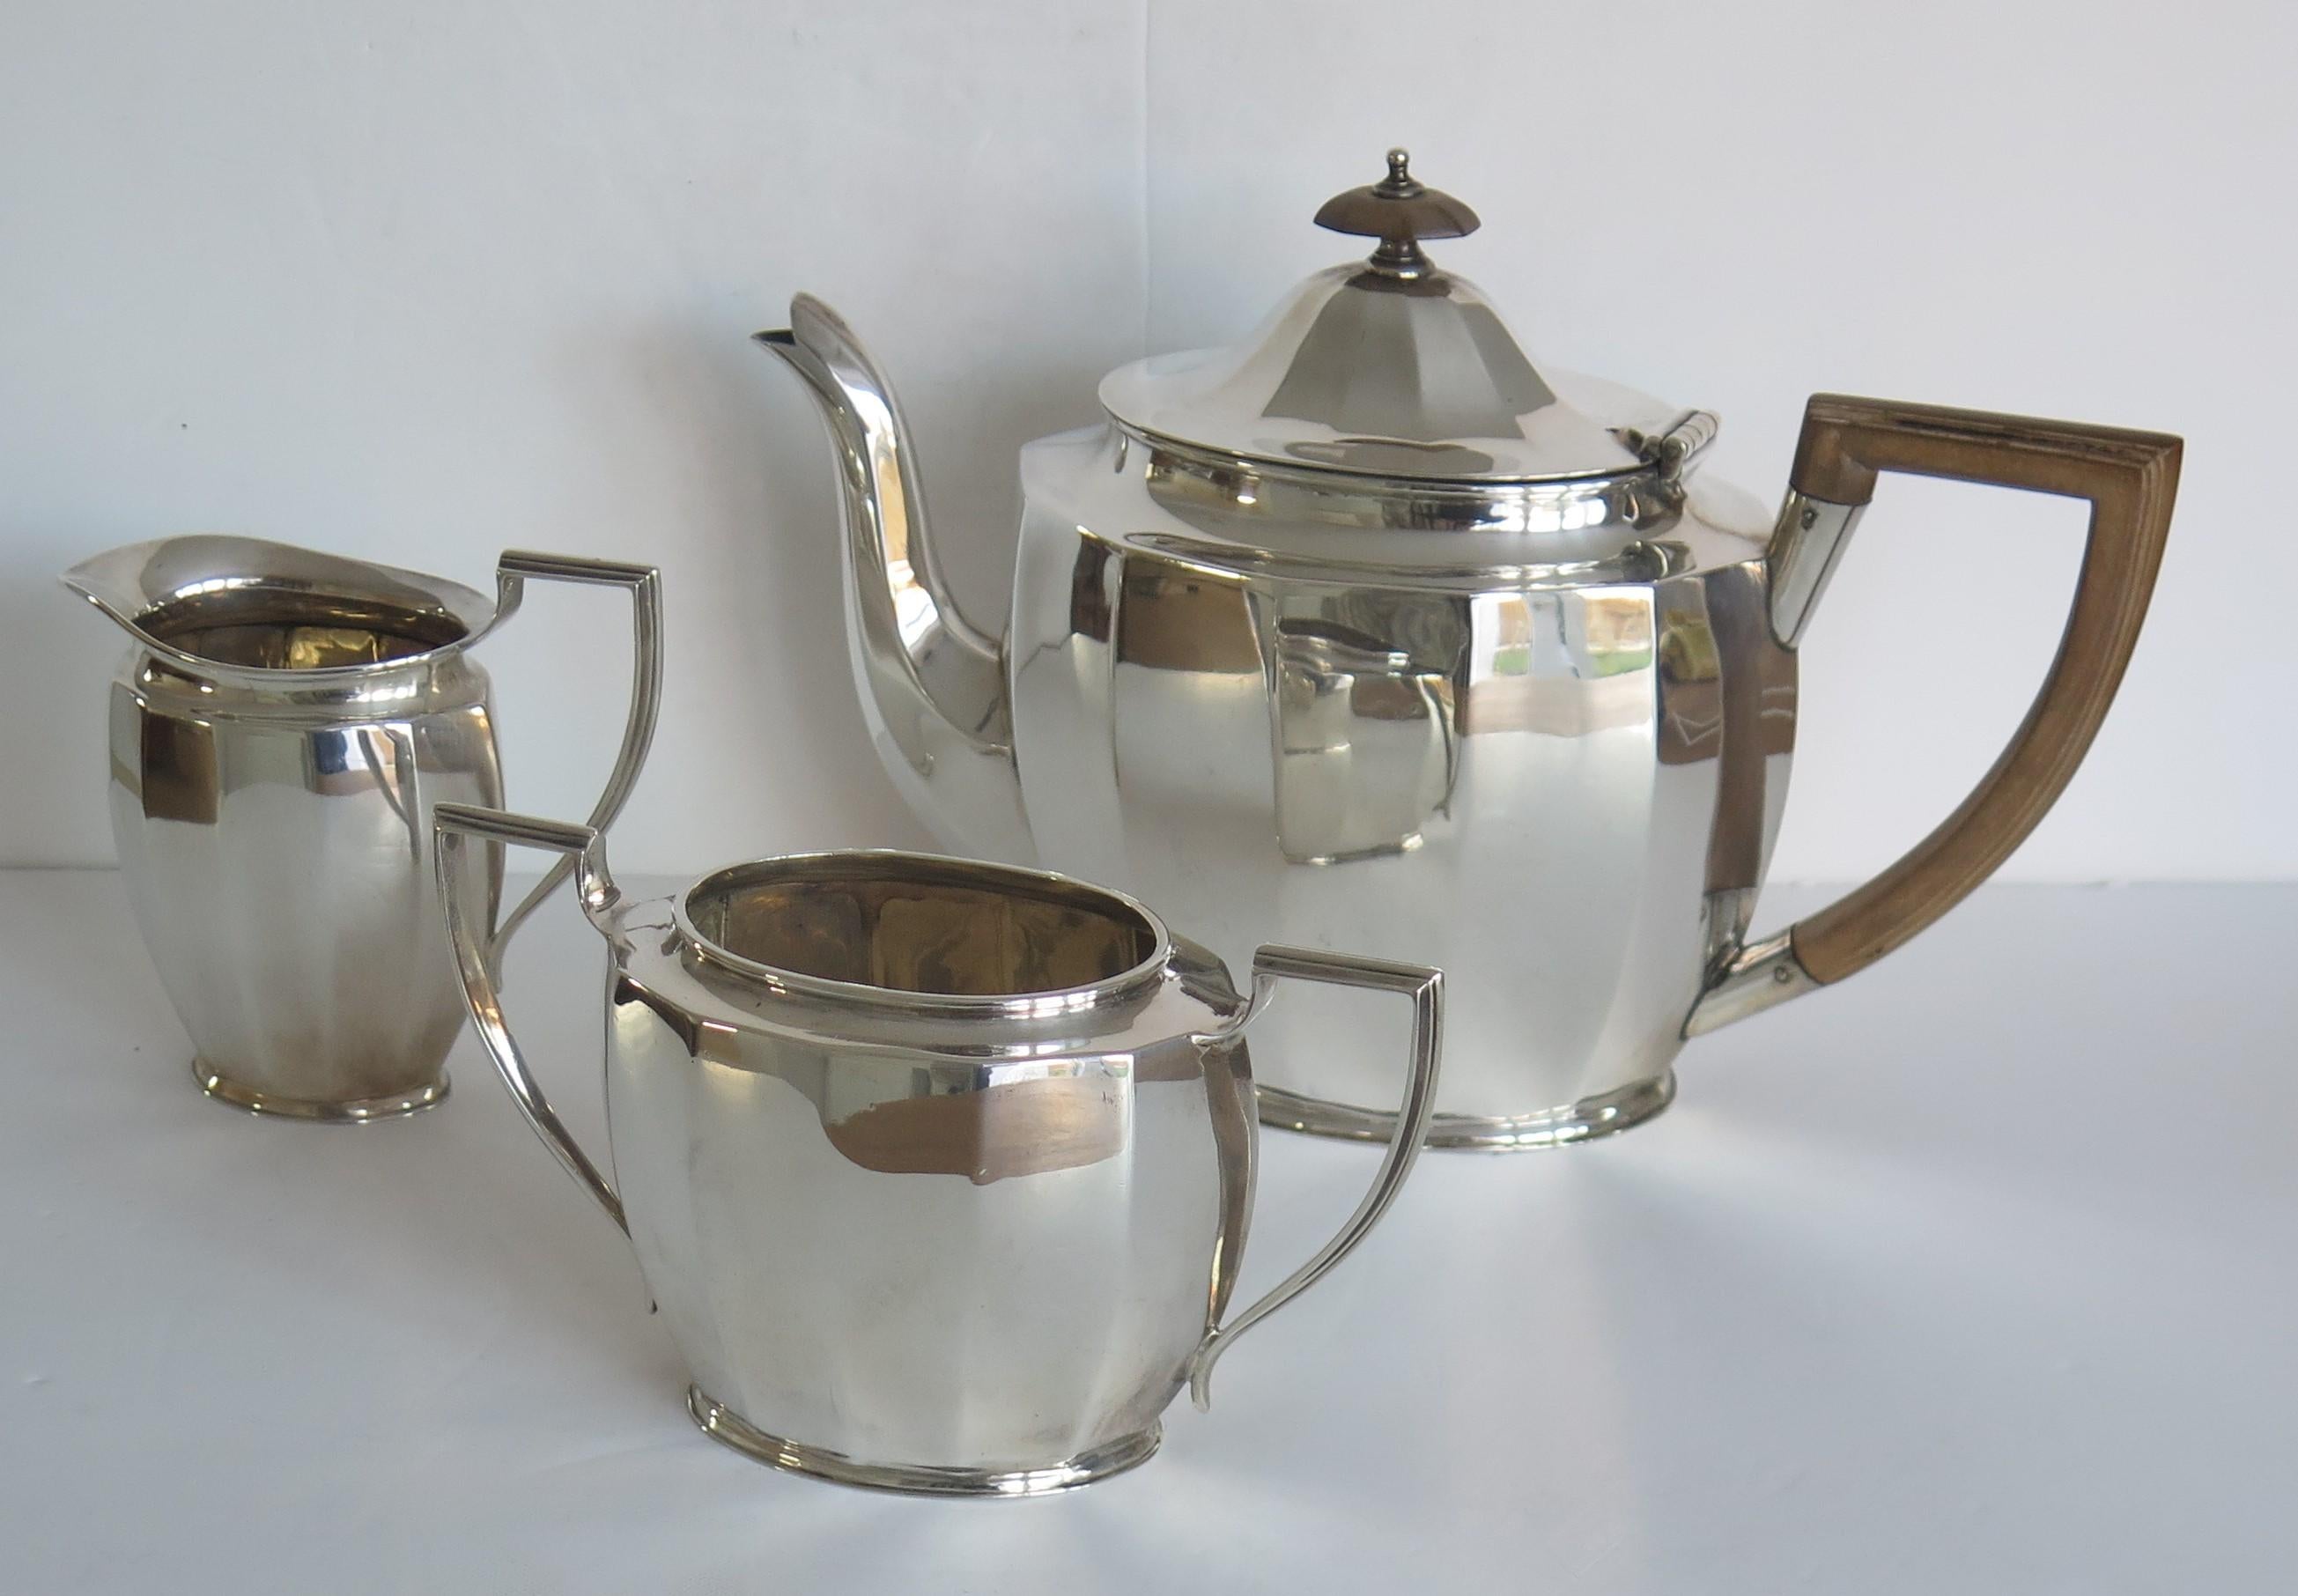 This is a fine quality Sterling Silver, Art Deco period, 3-piece tea set consisting of teapot, milk jug and Sugar Bowl, made by Cooper Brothers & Sons of Sheffield, England in 1930.

All pieces have a very 